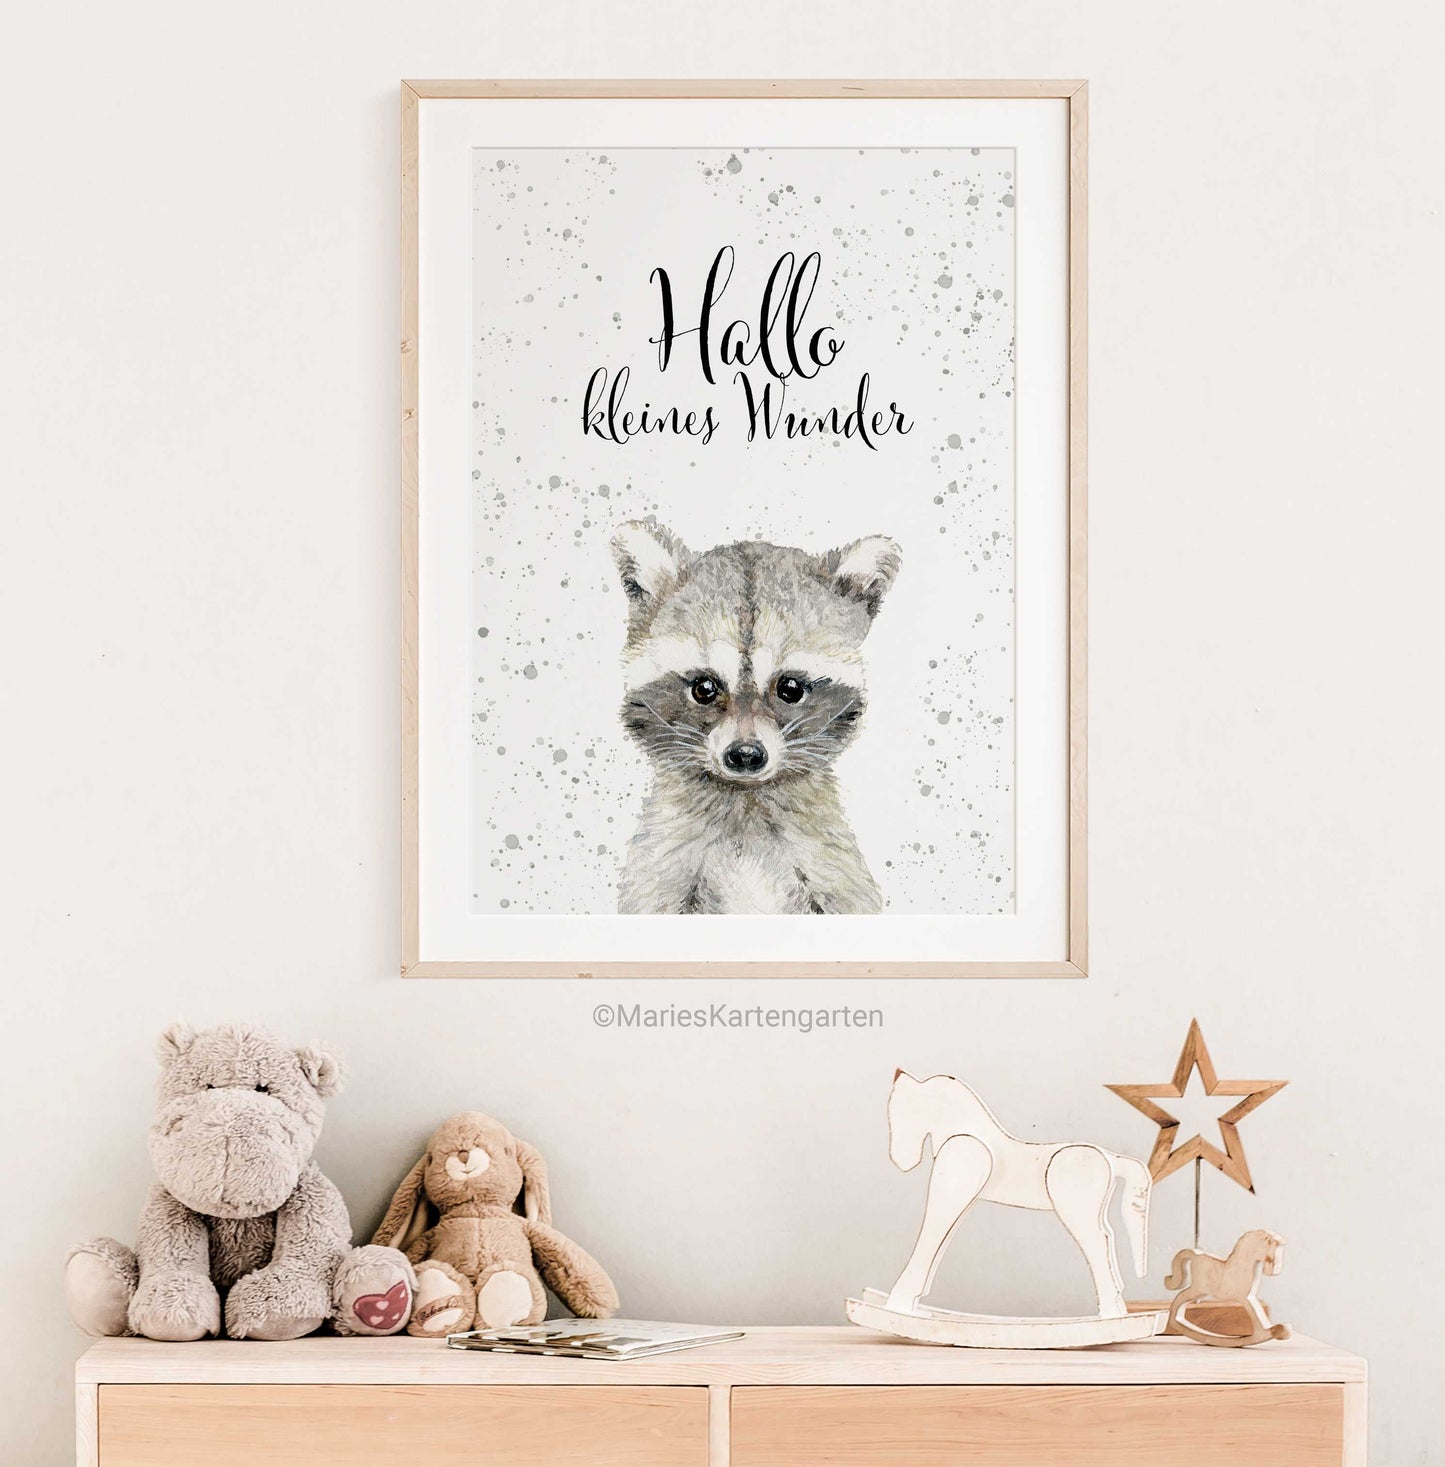 a picture of a raccoon on a wall above a dresser